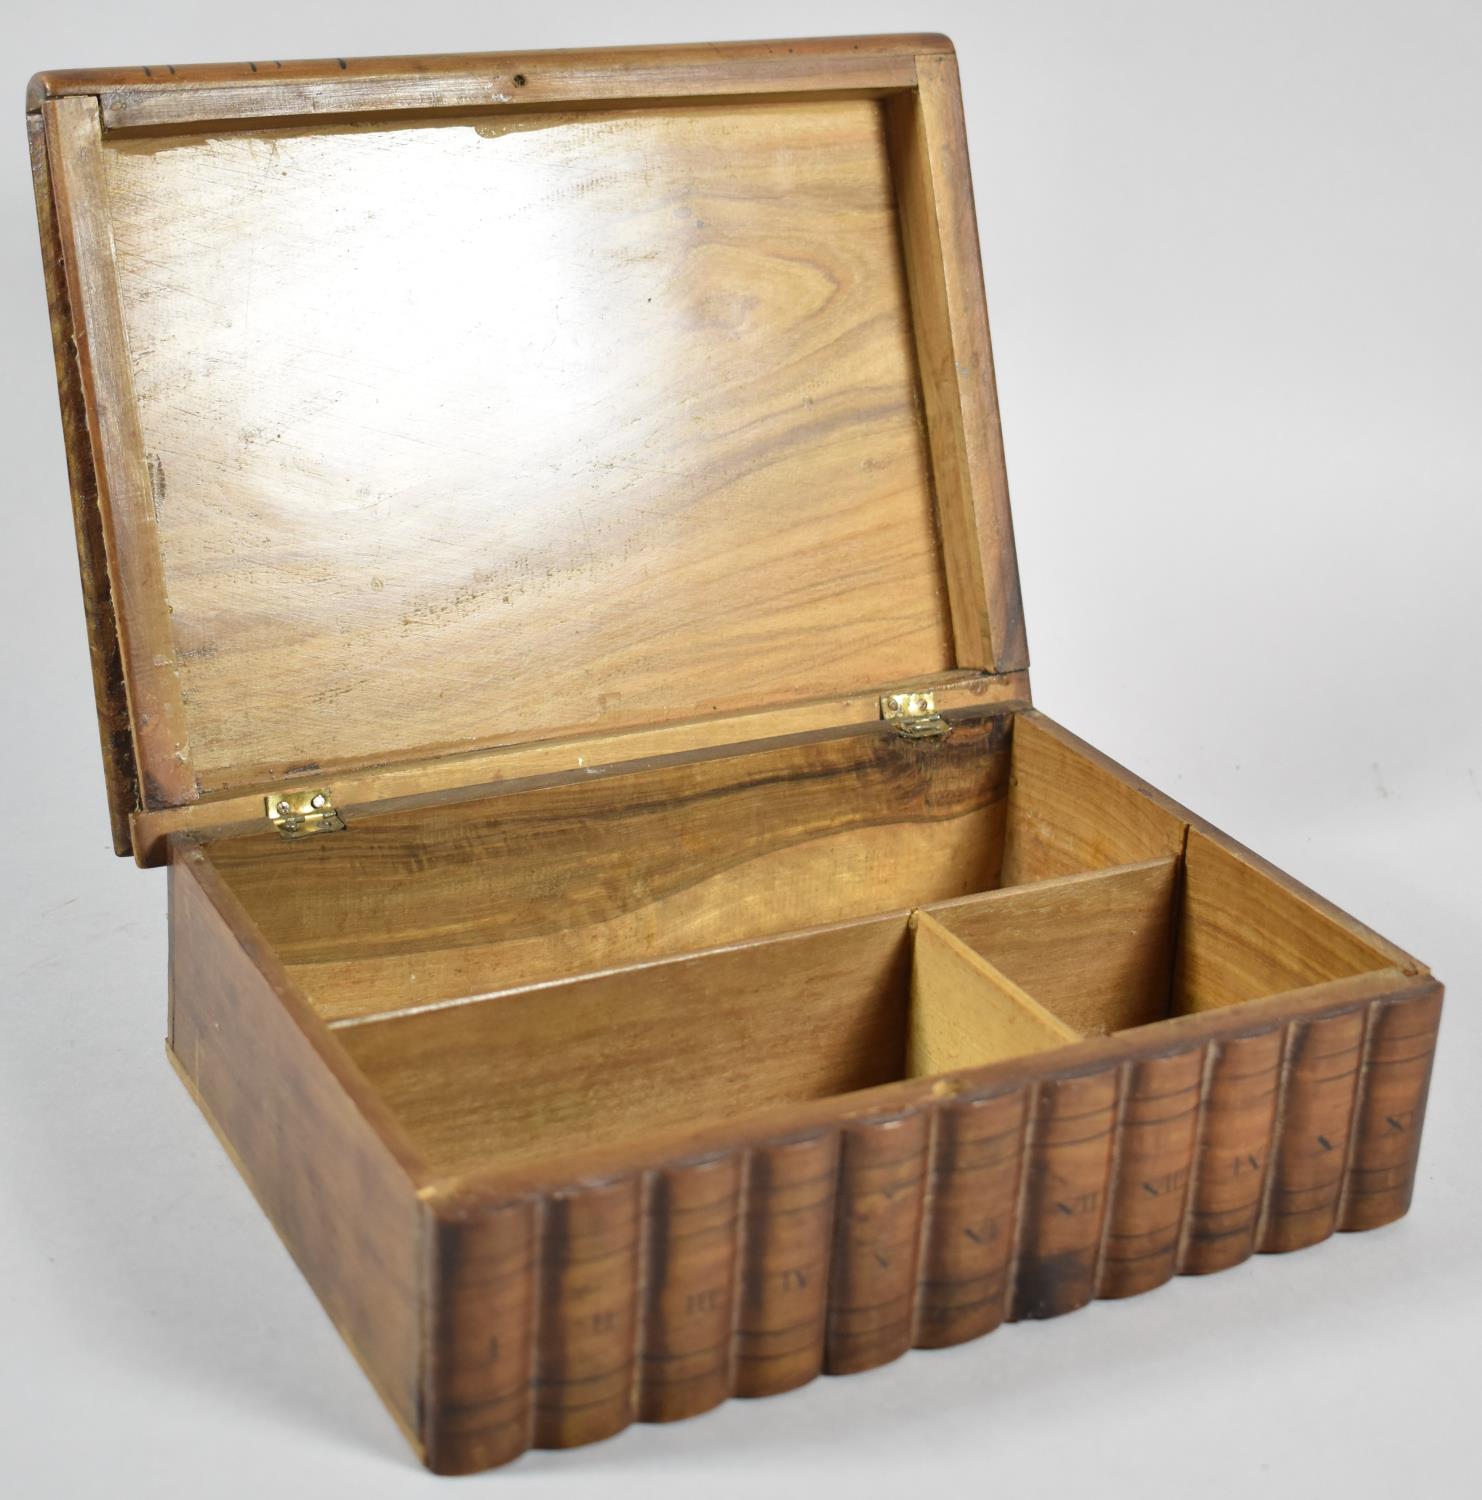 A Sorrento Puzzle Box with Fitted Interior, Lid Decorated with Scissors, Cotton Reel, Thimble and - Image 3 of 3